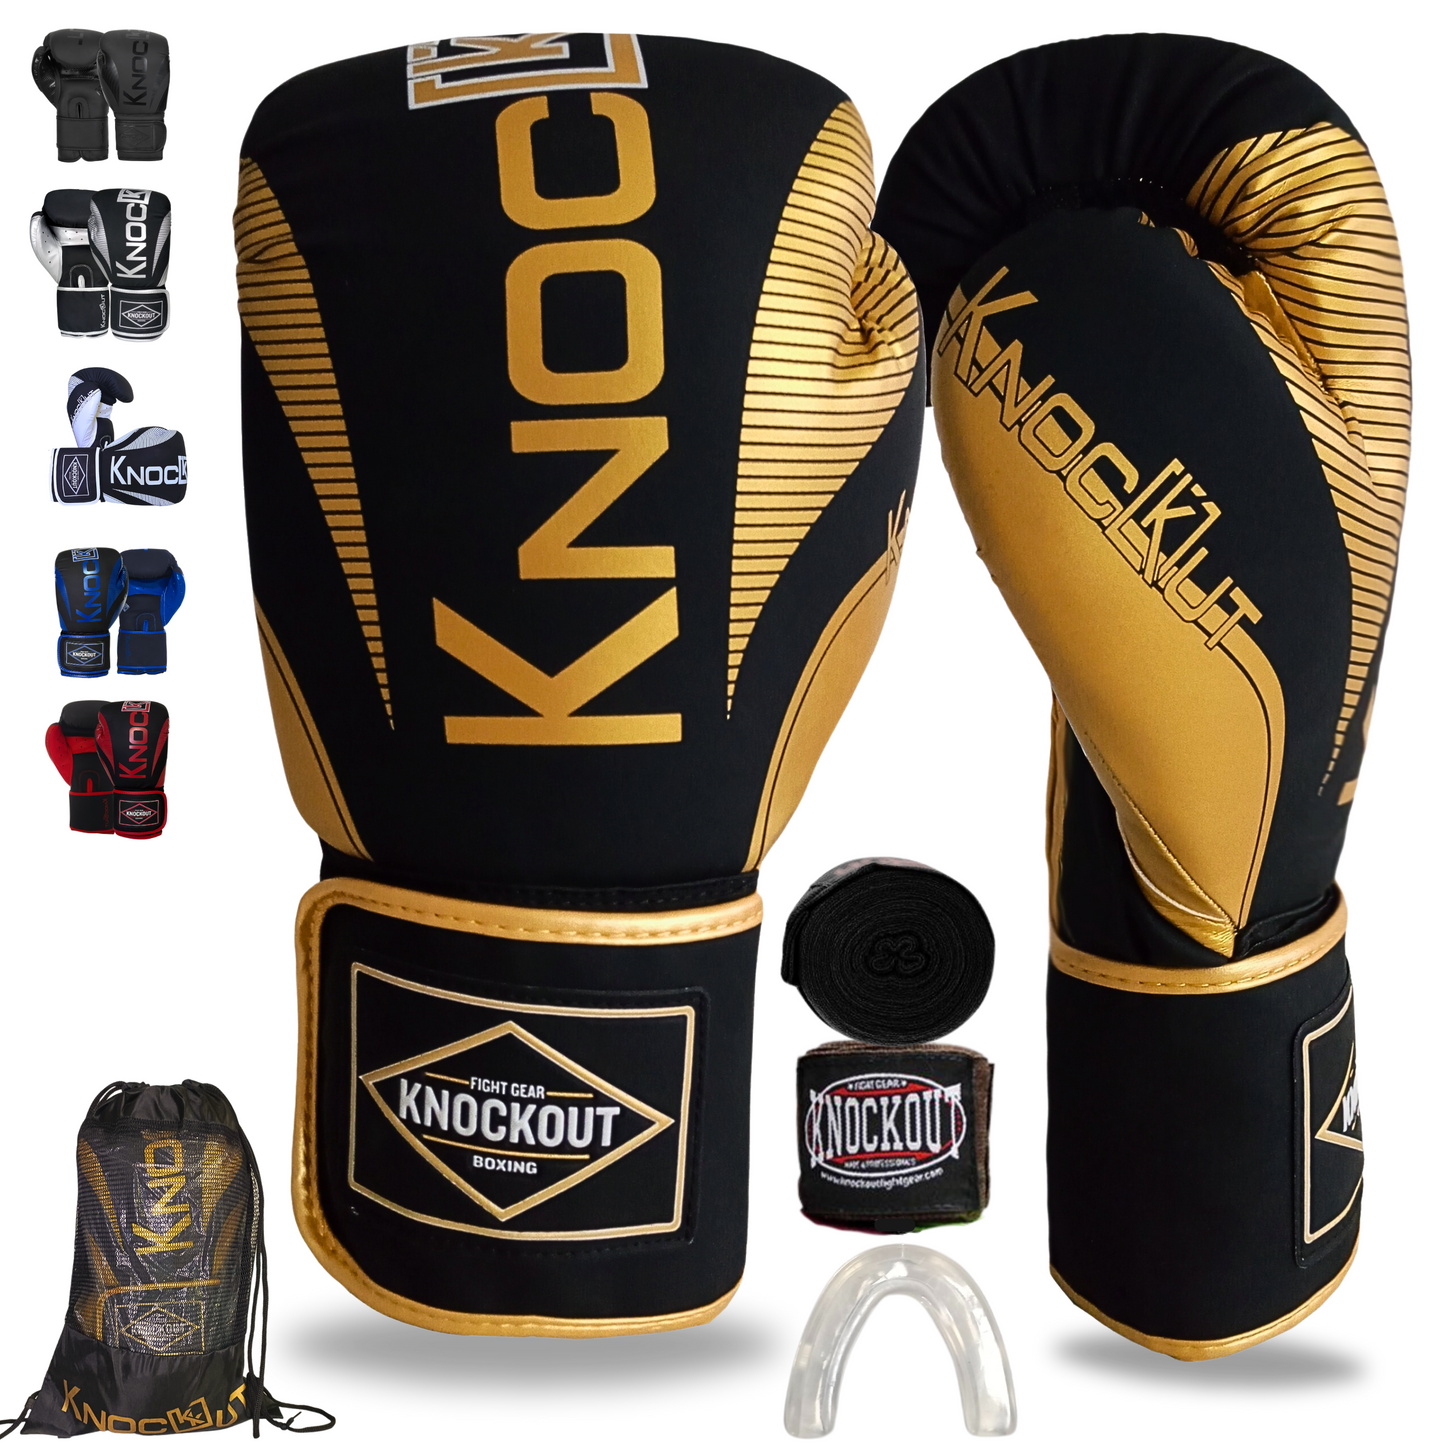 Knockout Elite Boxing Gloves with Hand Wraps and Mouth Guard for Men, Women Muay Thai, Kickboxing, Youth Heavy Bag Workouts, and Home Gym Training